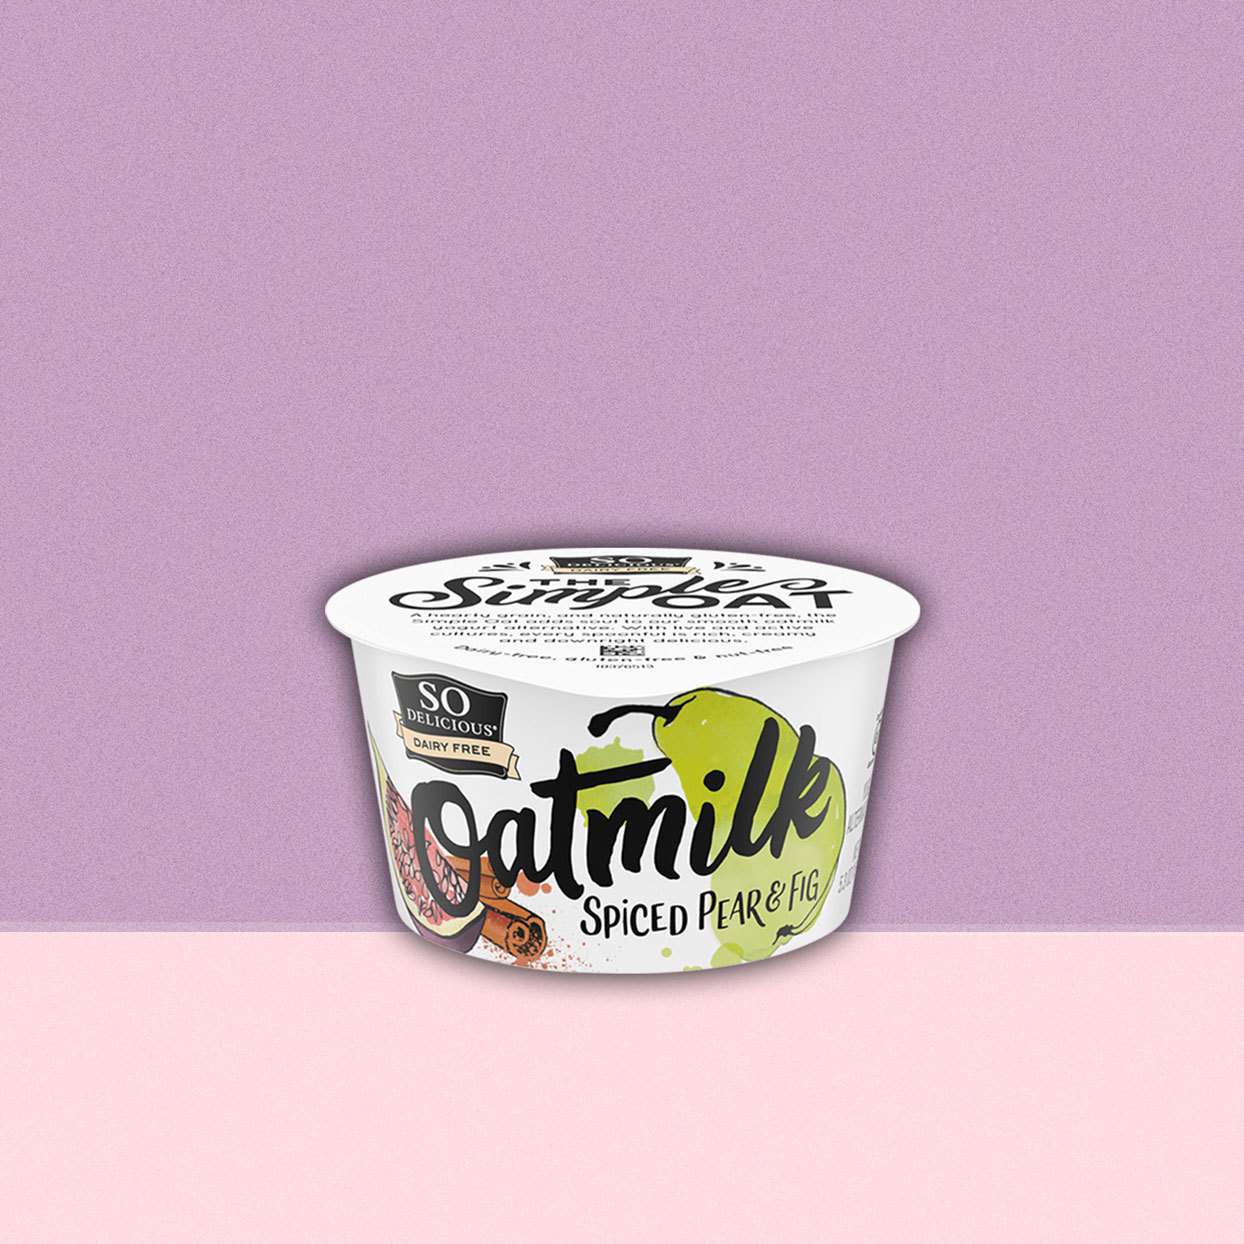 So Delicious brand Dairy Free Oatmilk yogurt, Spiced Pear & Fig flavor, in container